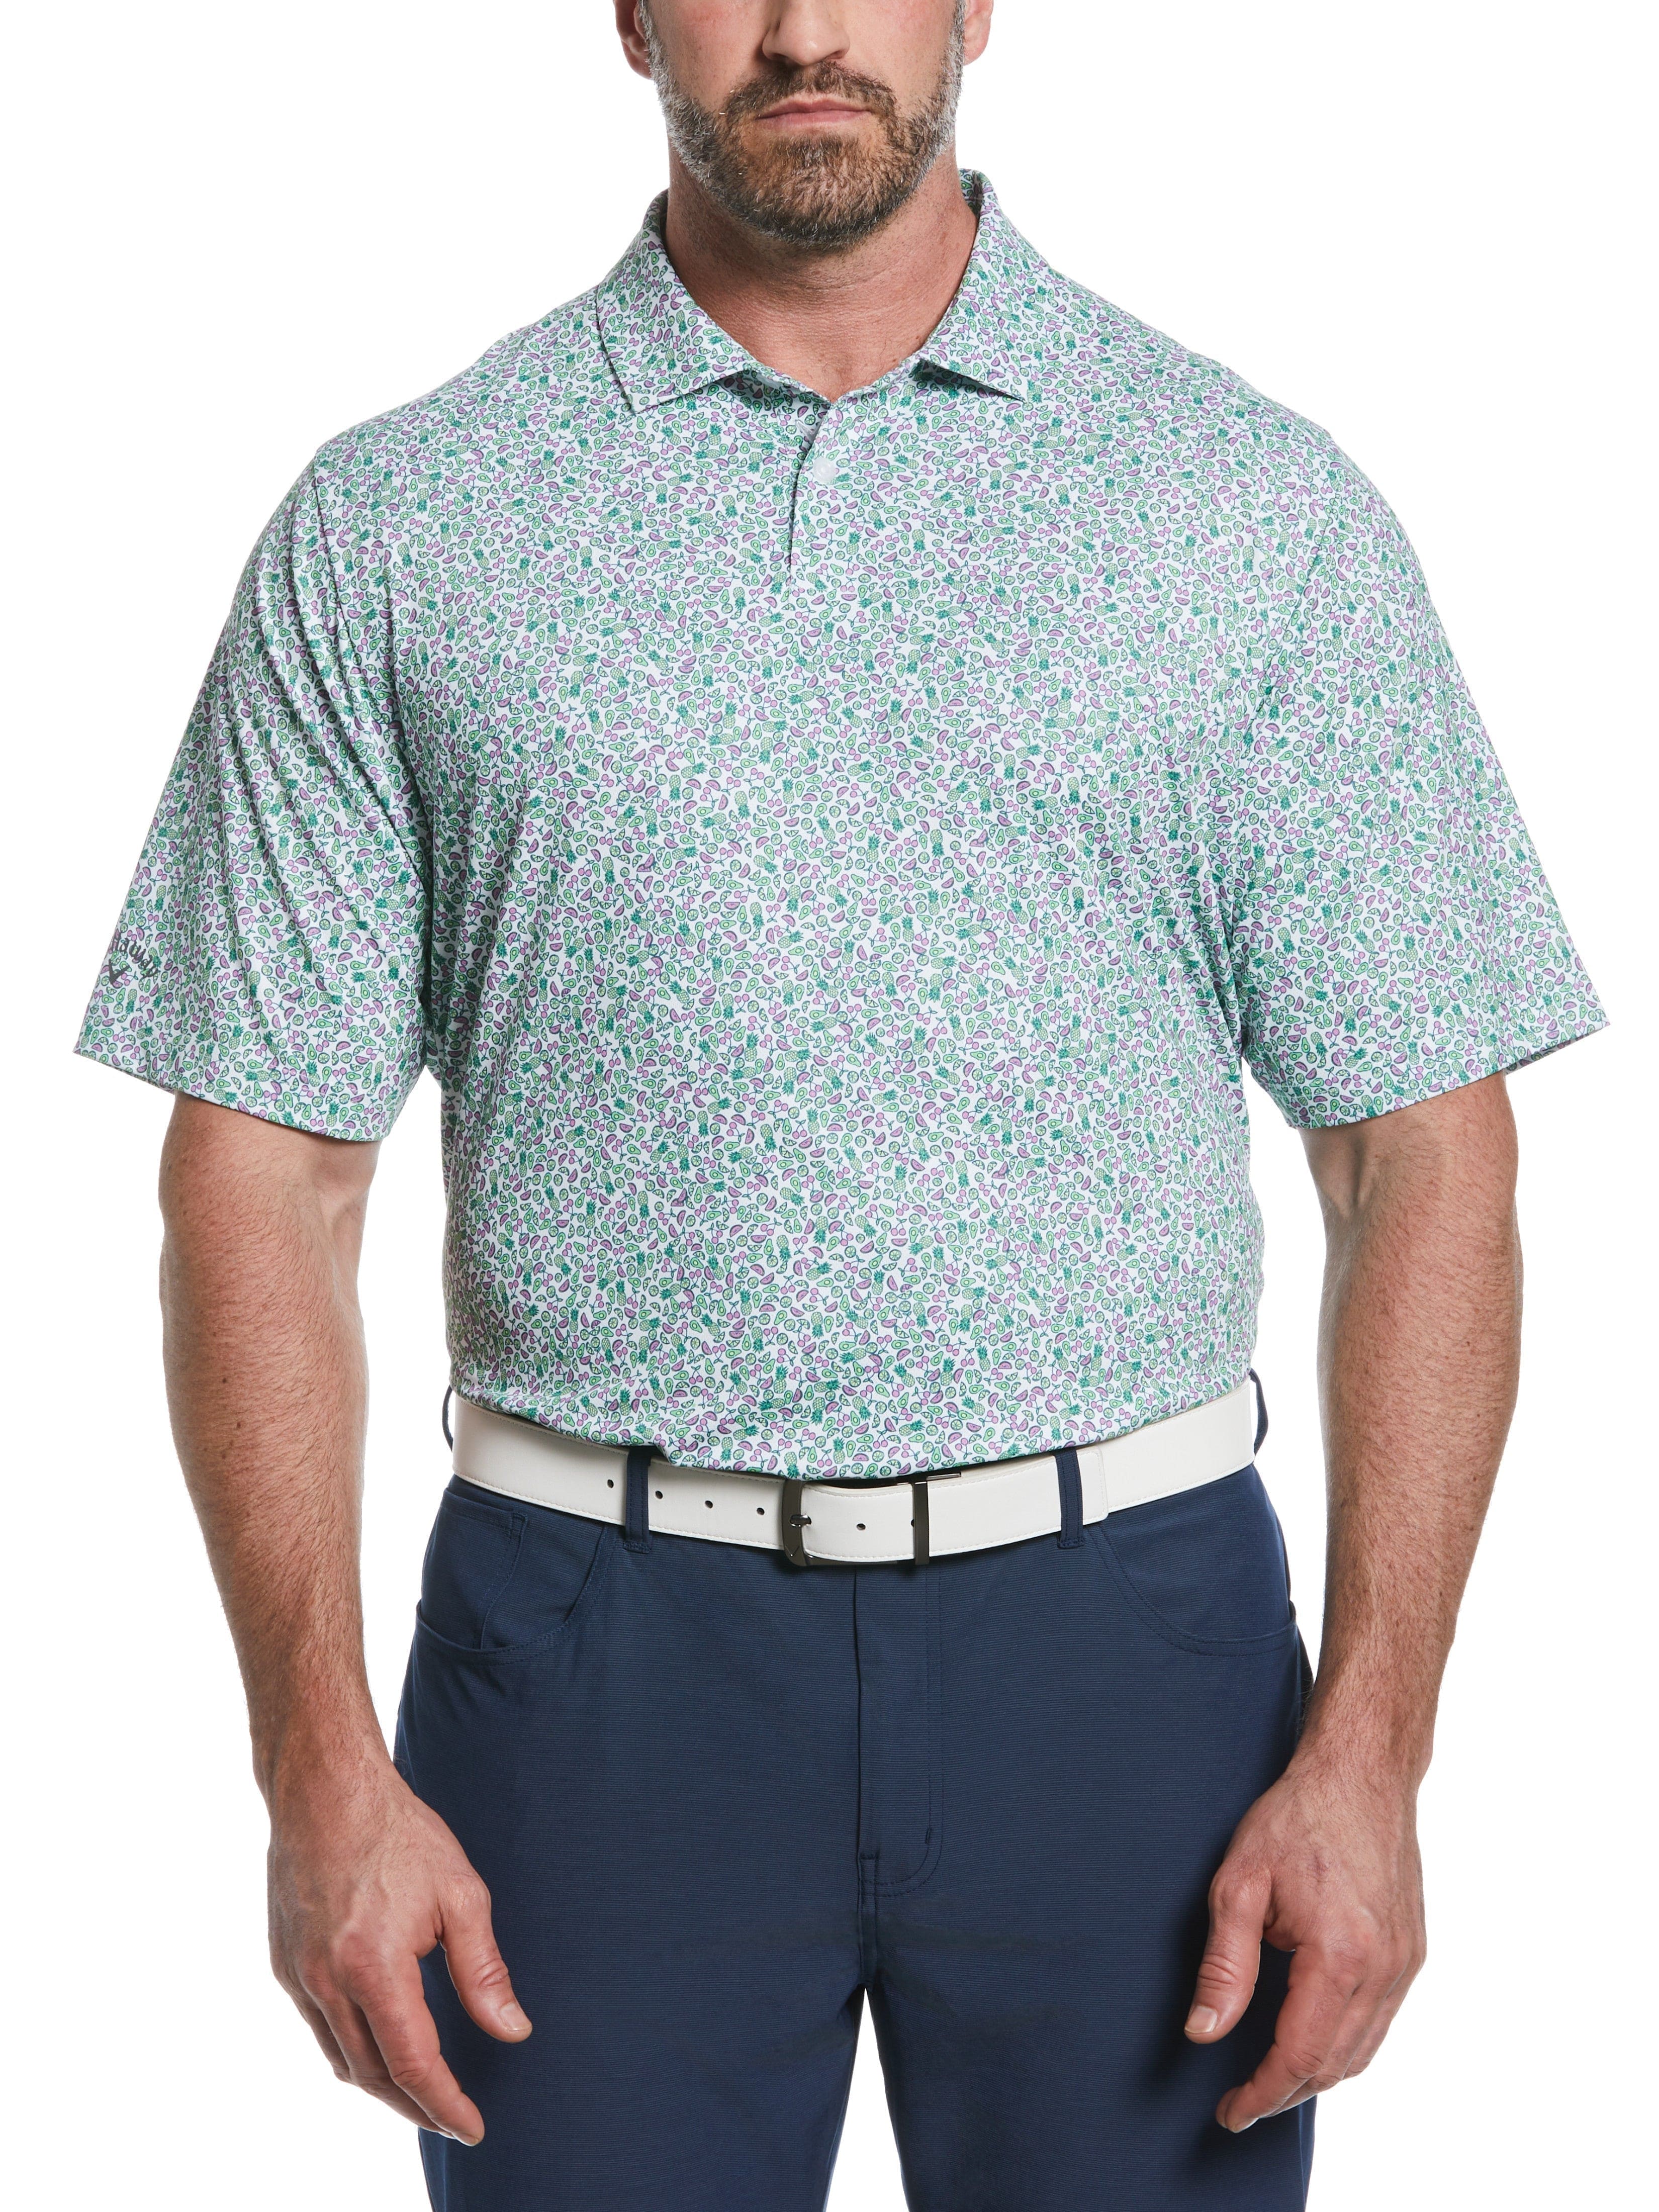 Callaway Apparel Mens Big & Tall Ventilated Tropical Fruit Print Golf Polo Shirt, Size 1X, Polyester/Recycled Polyester/Elastane | Golf Apparel Shop